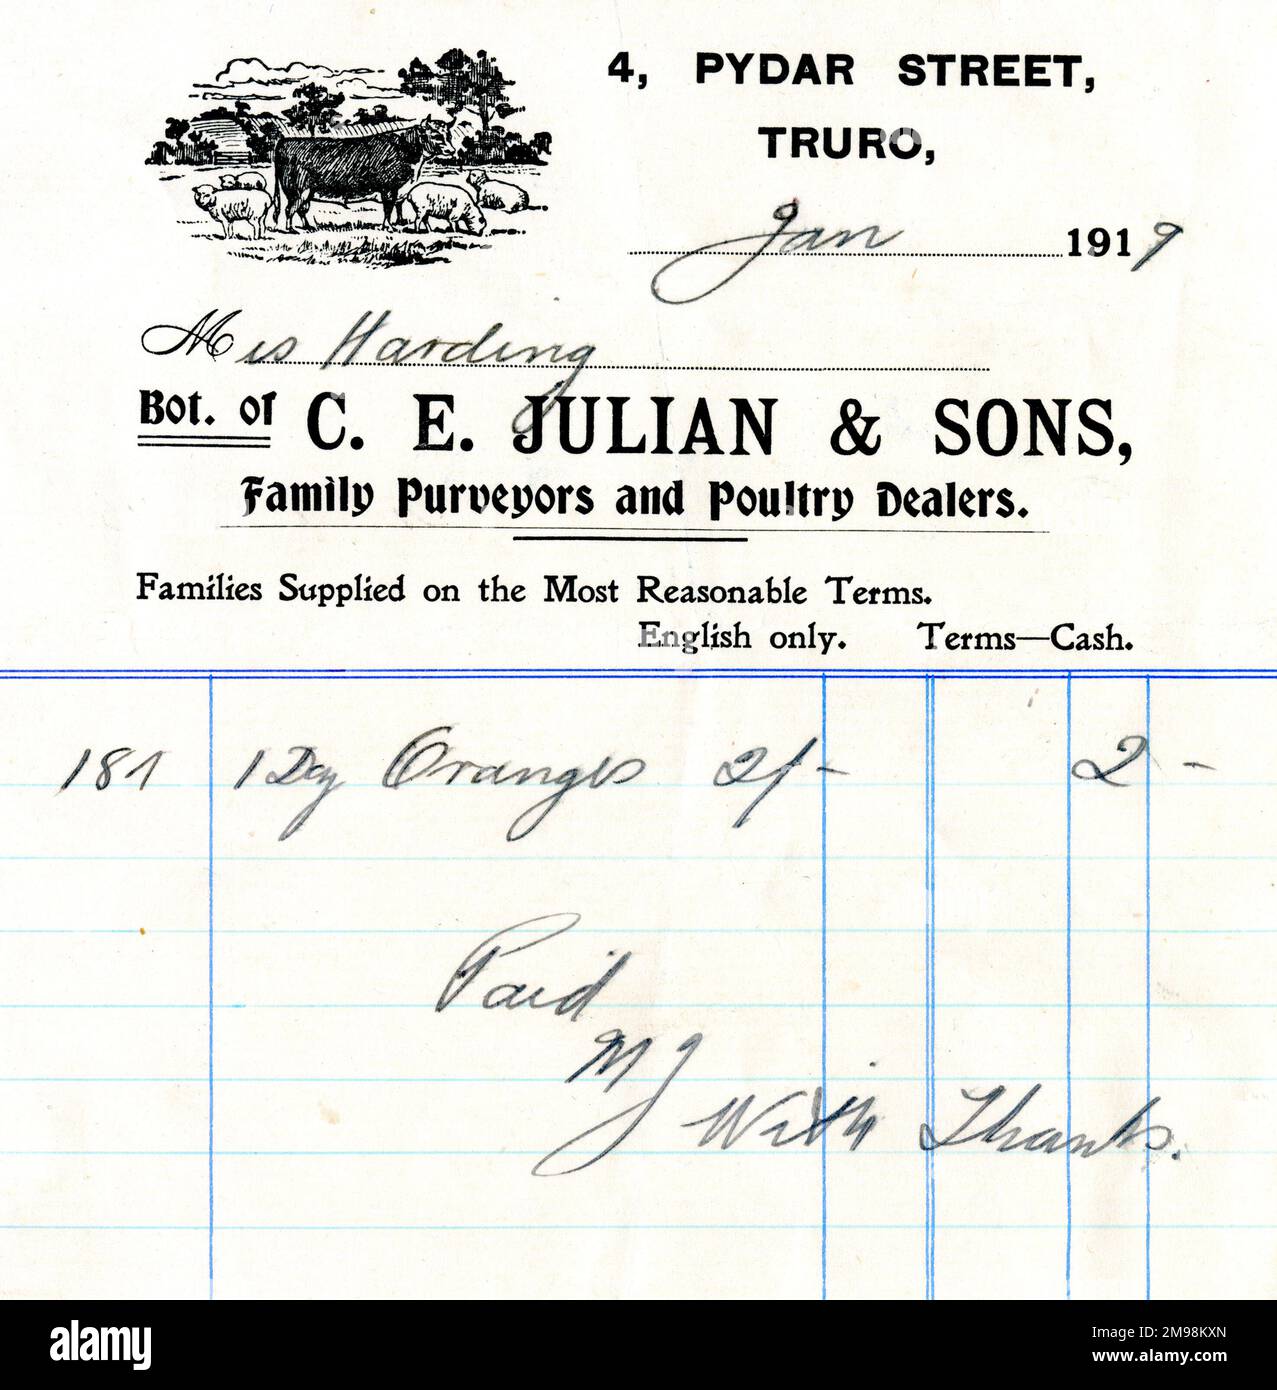 Stationery, C E Julian & Sons, Family Purveyors and Poultry Dealers, 4 Pydar Street, Truro, Cornwall, with handwritten details. Stock Photo